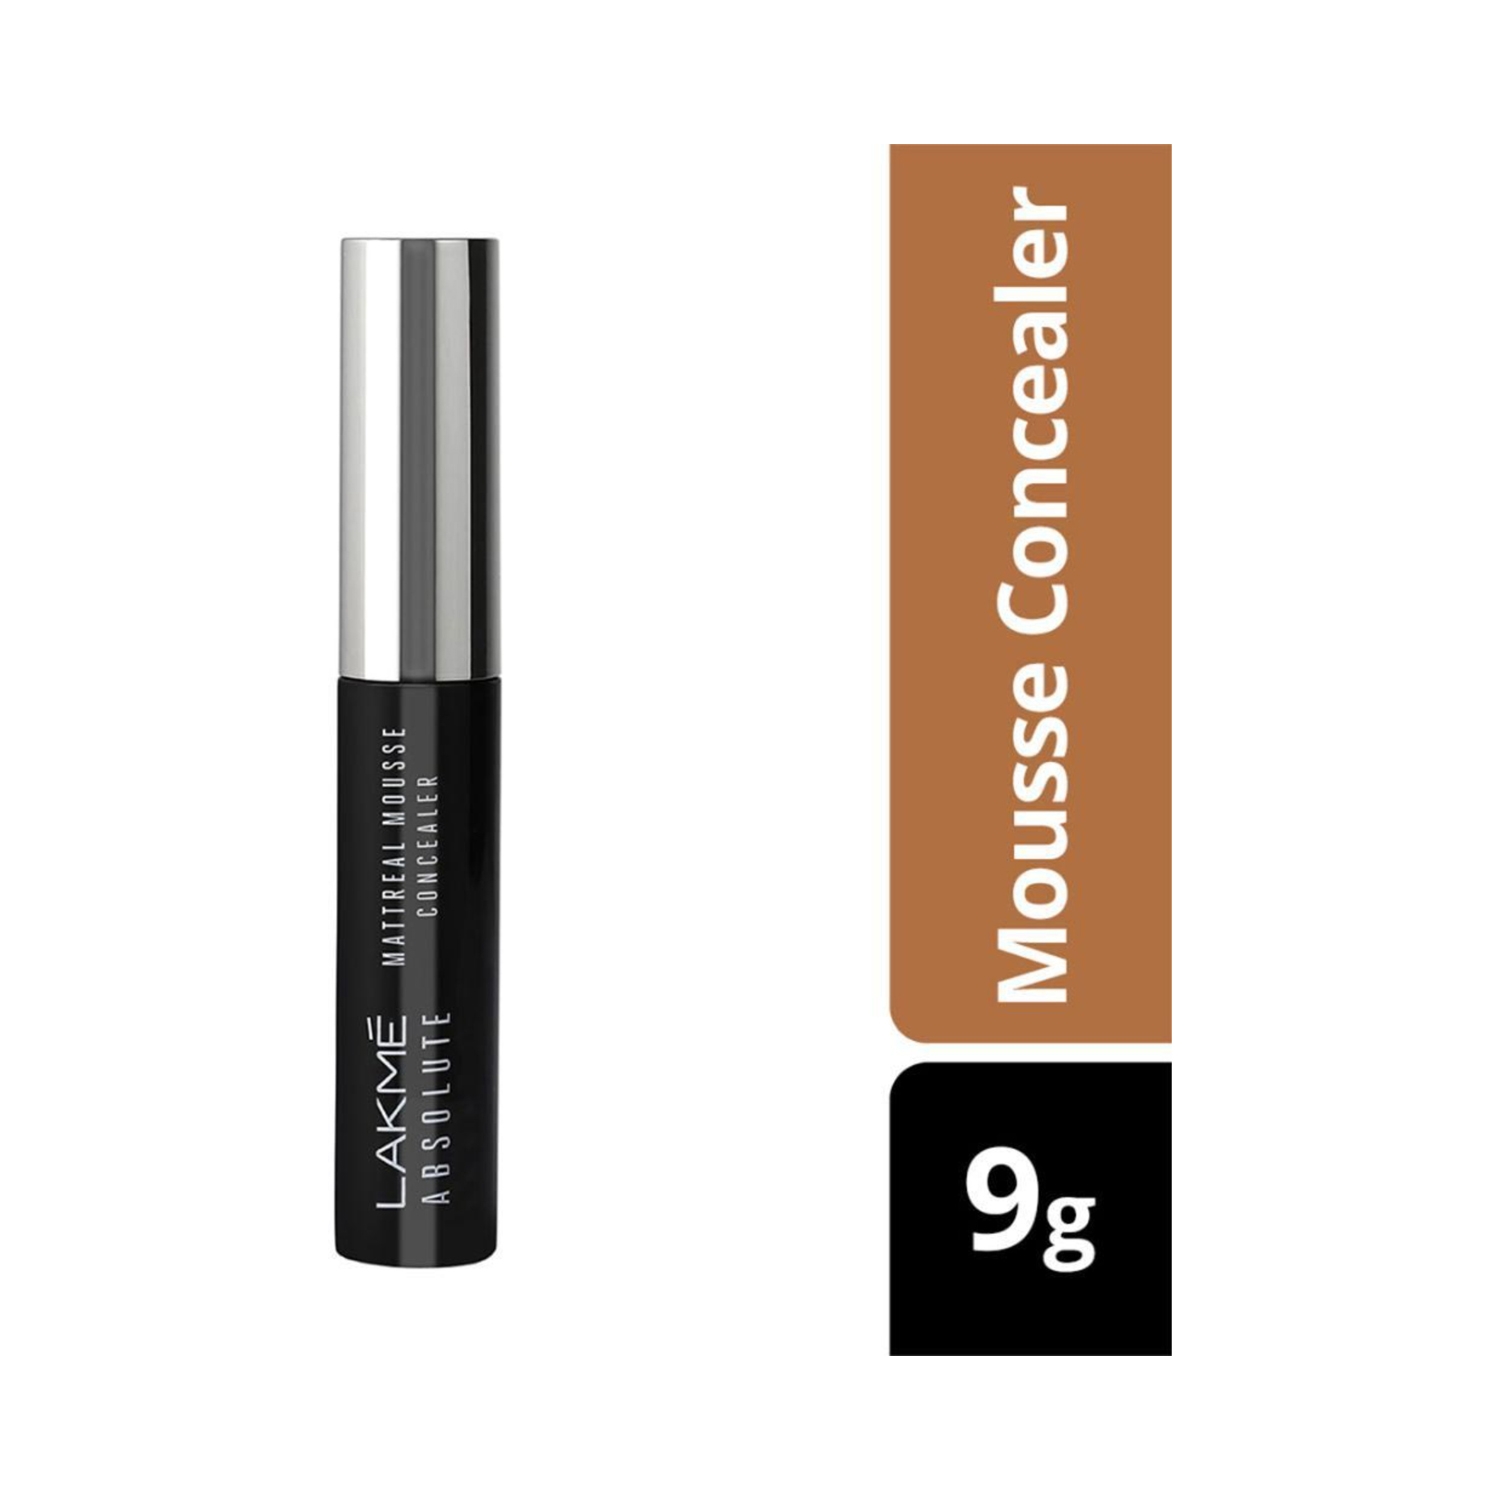 Lakme | Lakme Absolute Mattereal Mousse Concealer - 06 Walnut (9g)